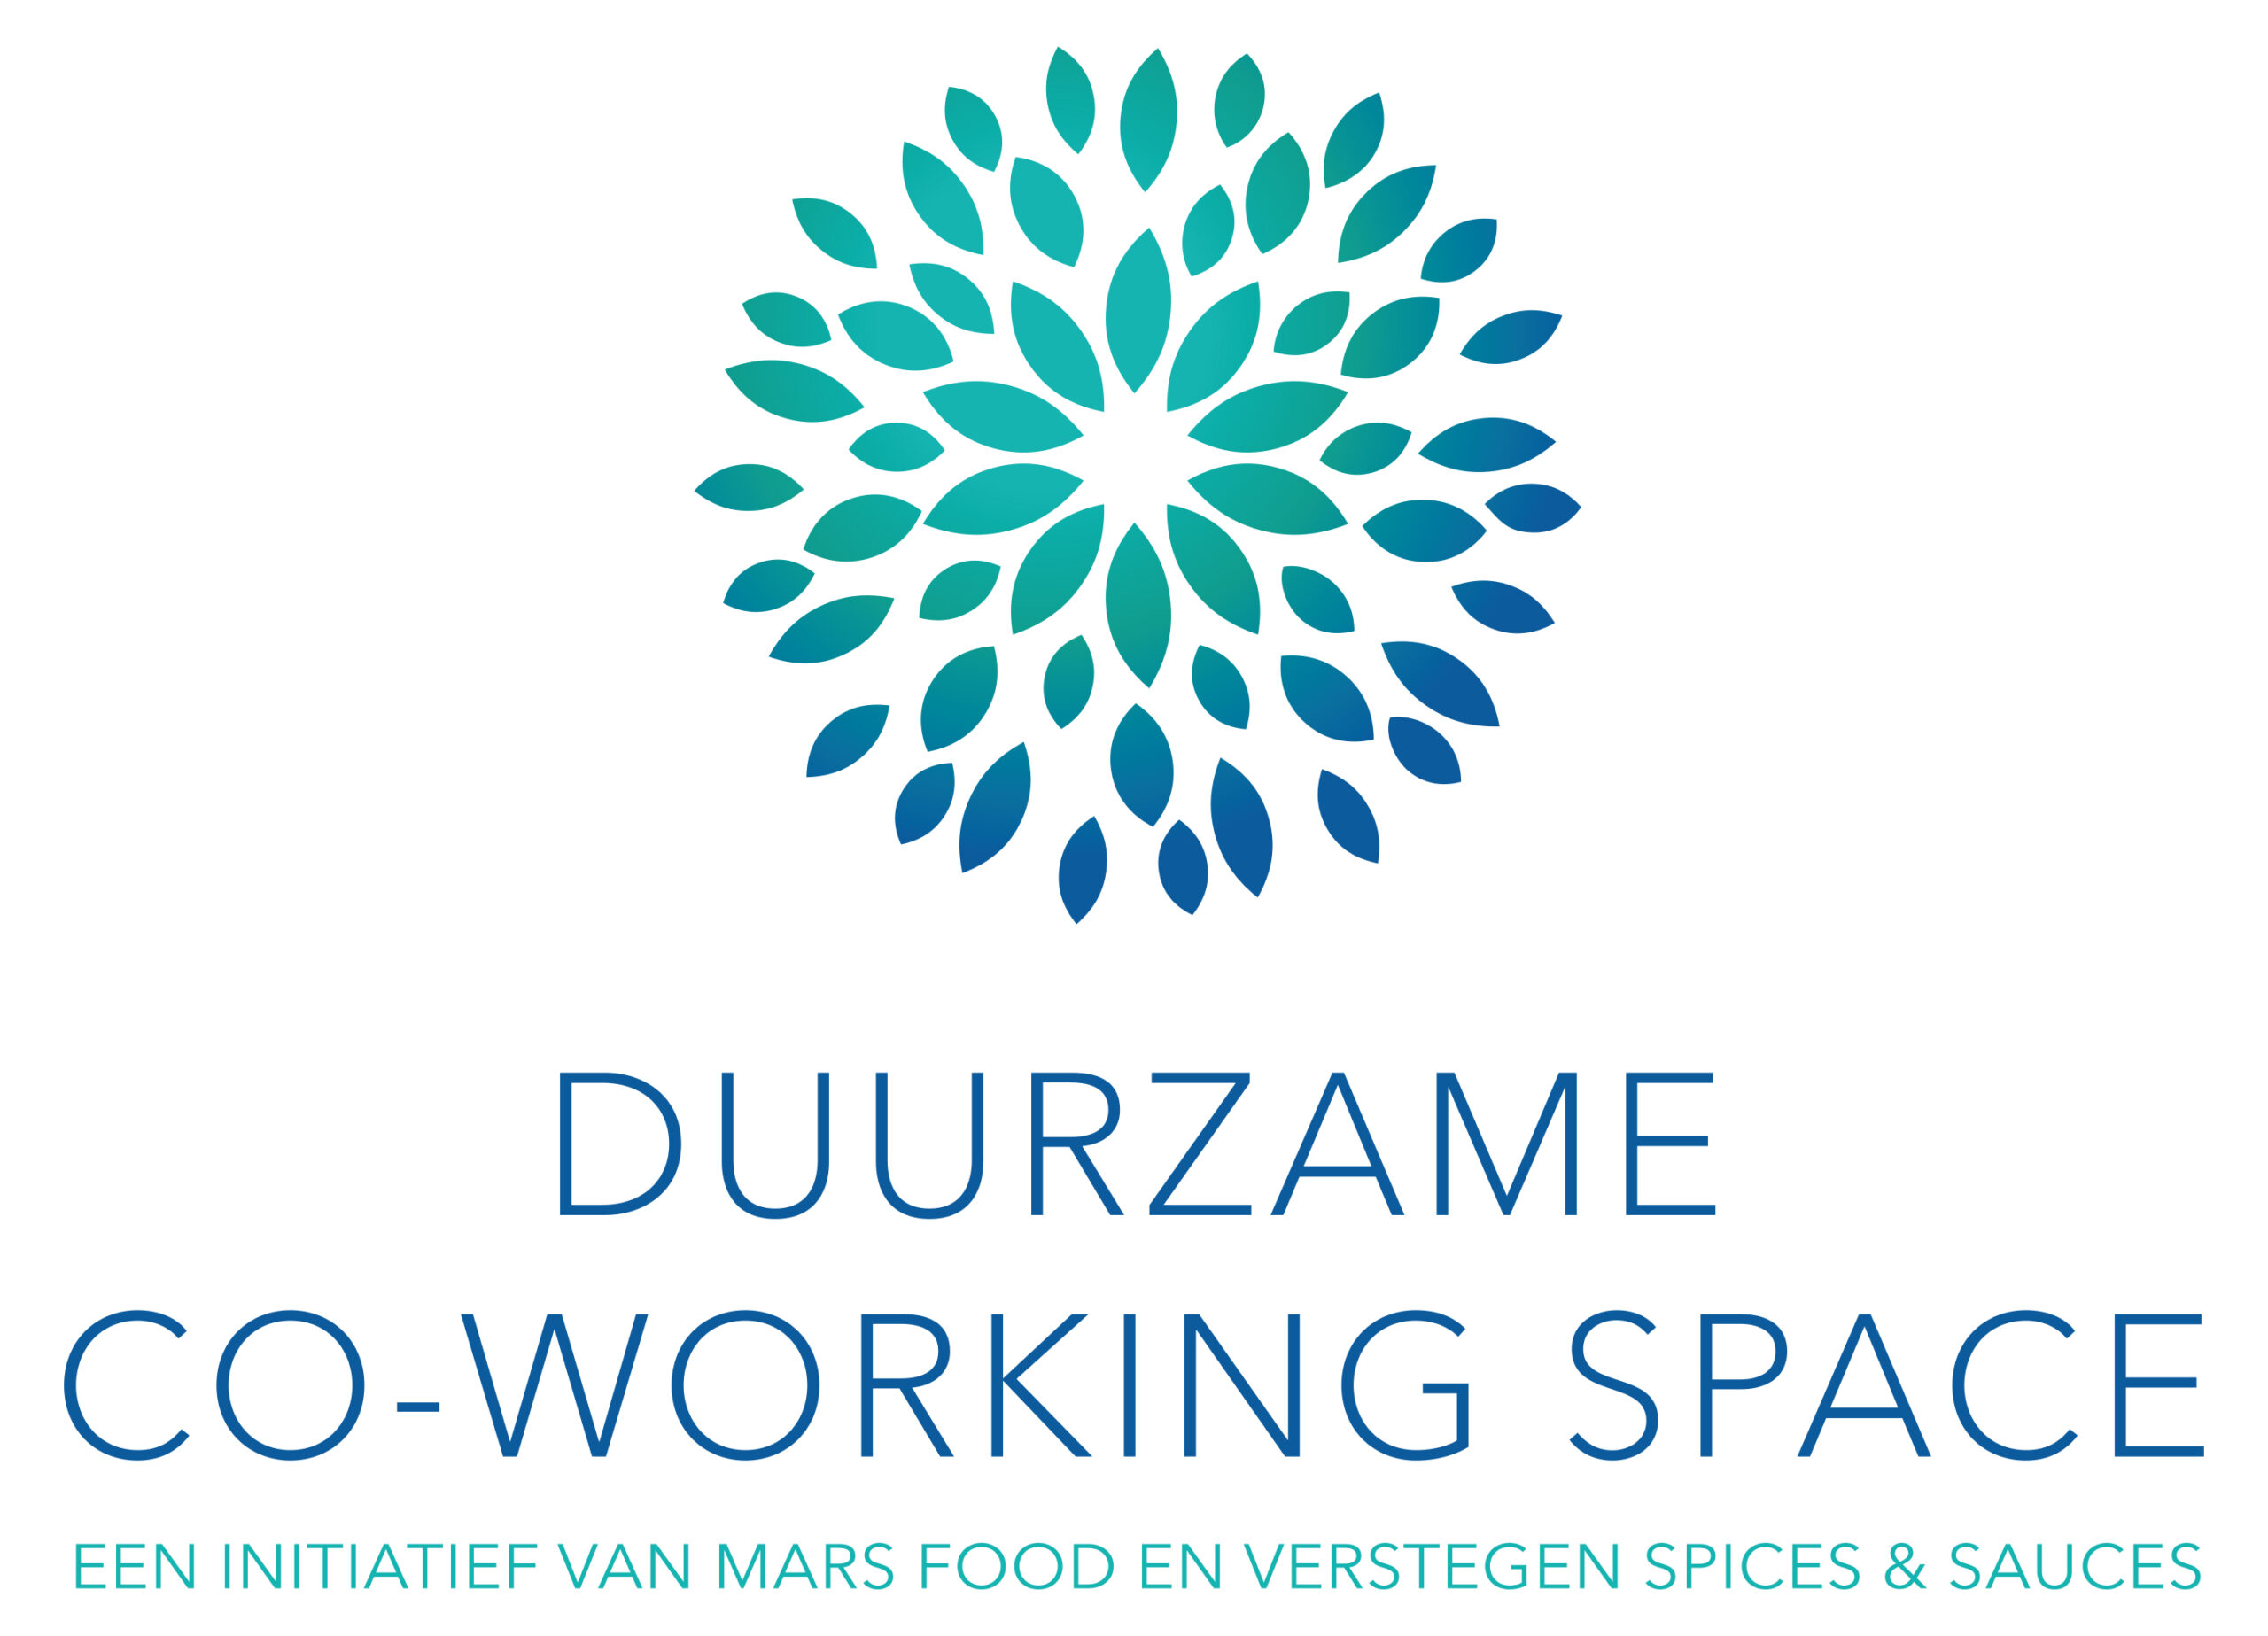 Duurzame co-working space